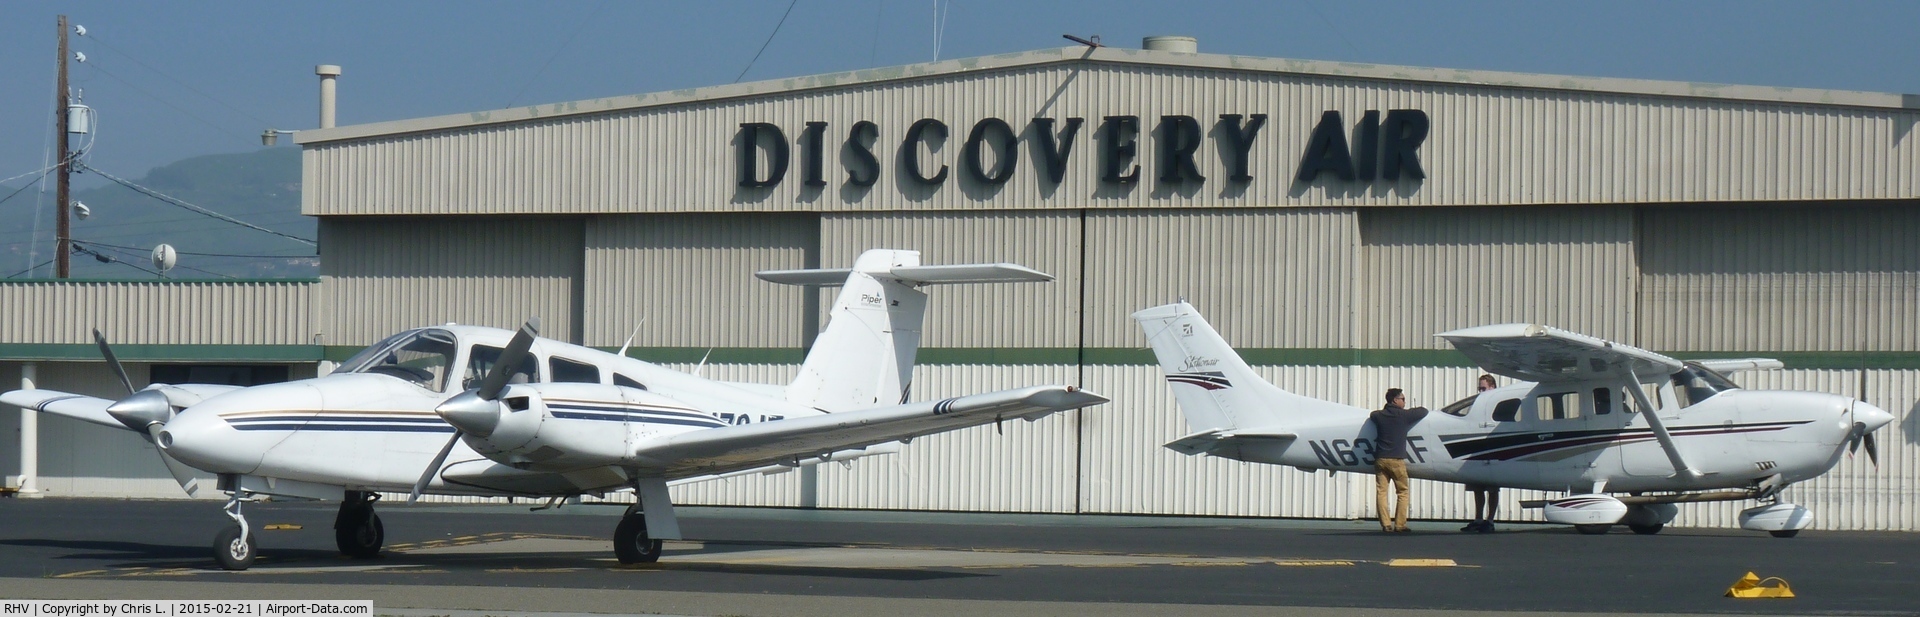 Reid-hillview Of Santa Clara County Airport (RHV) - The Discovery Air hangar with one of Nice Air's Piper Seneca's and Discovery Air's Cessna 206s.